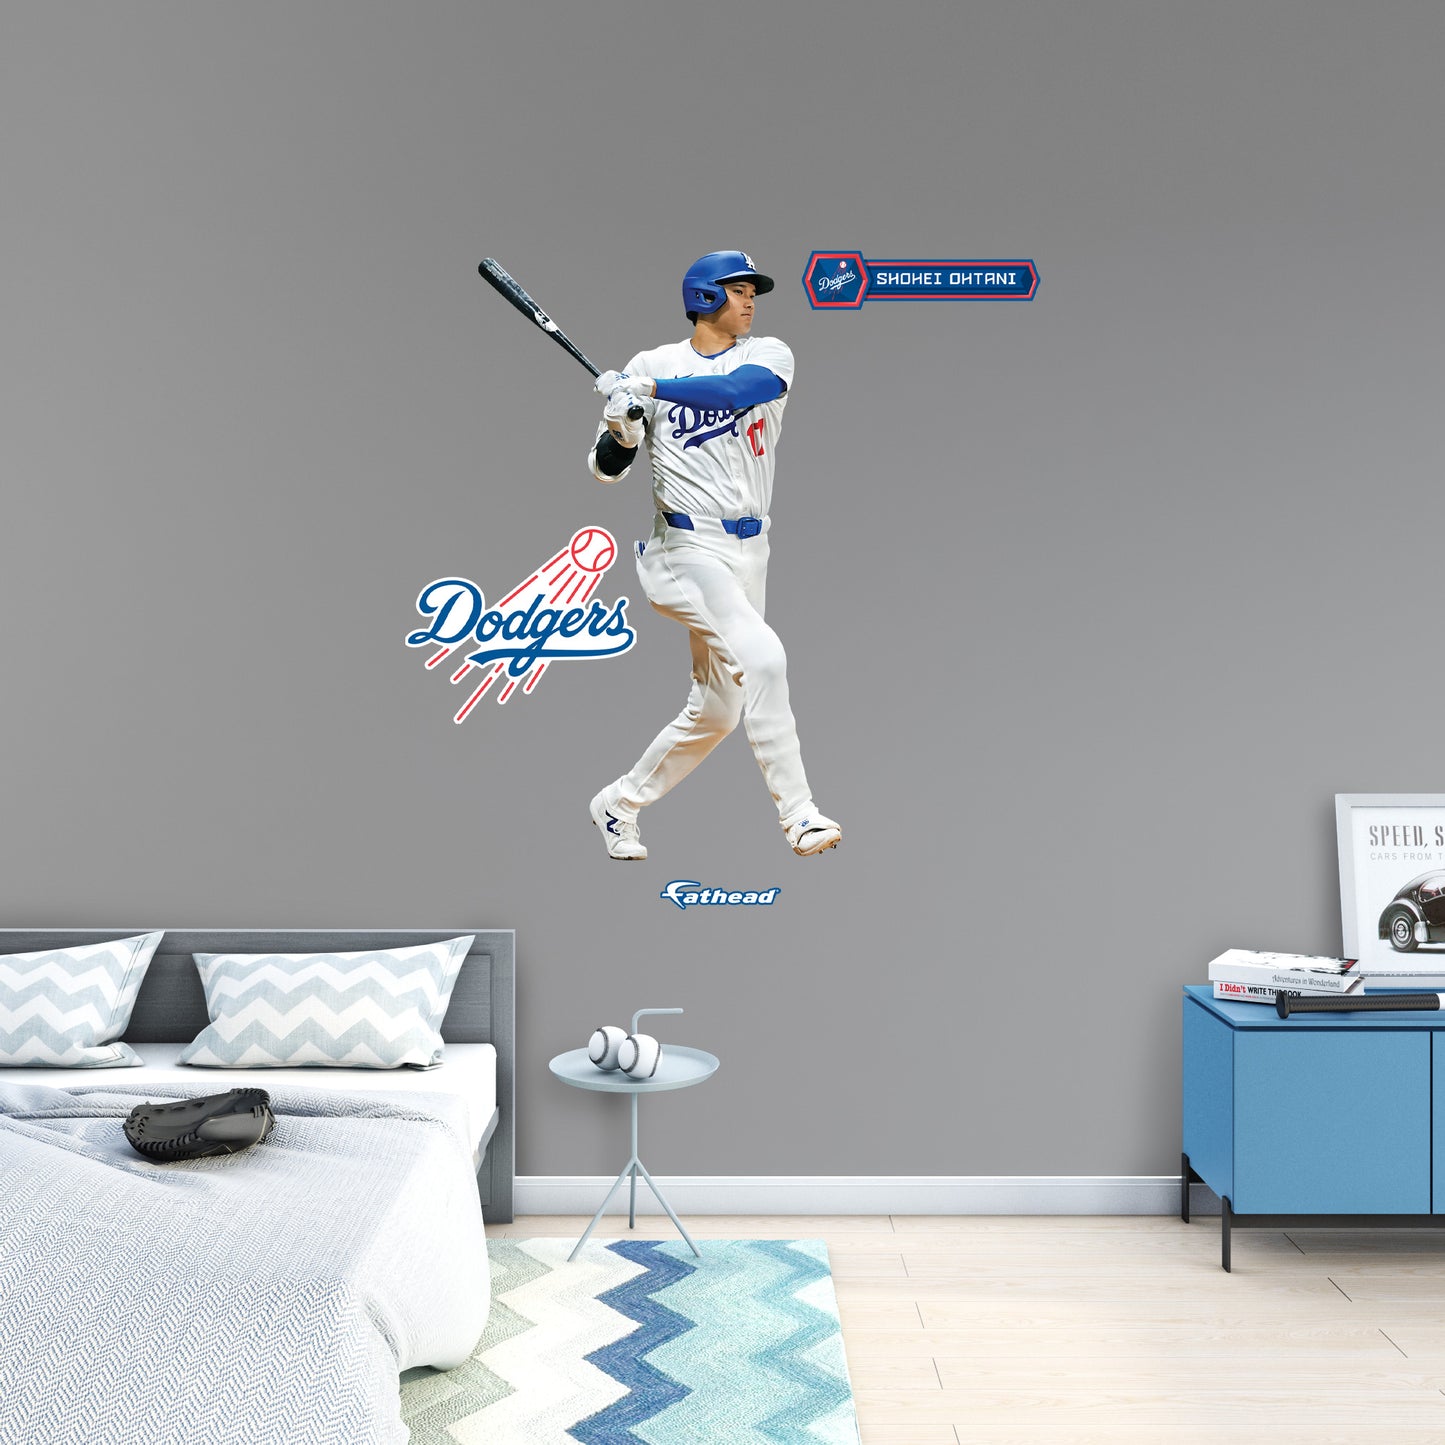 Los Angeles Dodgers: Shohei Ohtani Home        - Officially Licensed MLB Removable     Adhesive Decal